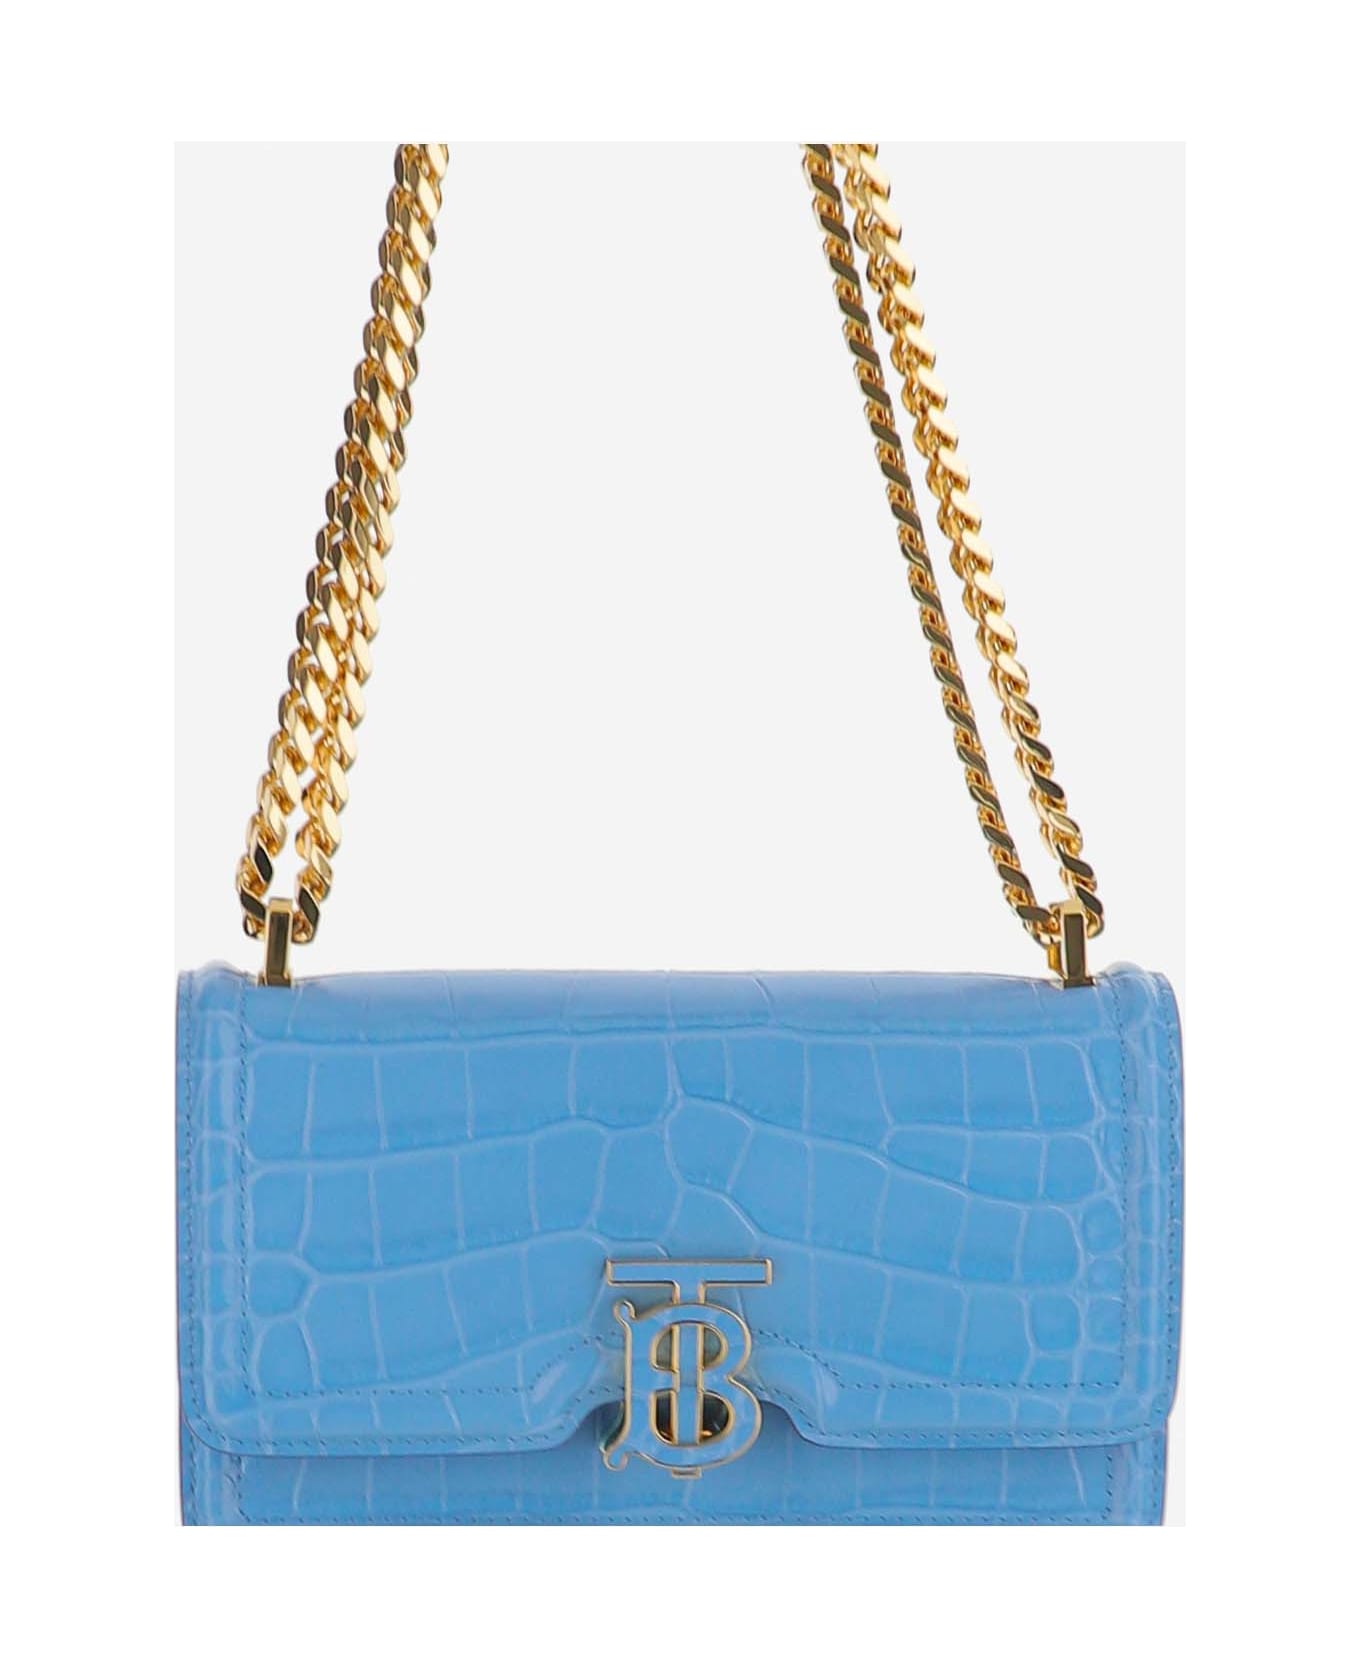 Burberry Mini Tb Embossed Leather Bag With Chain Strap - Clear Blue